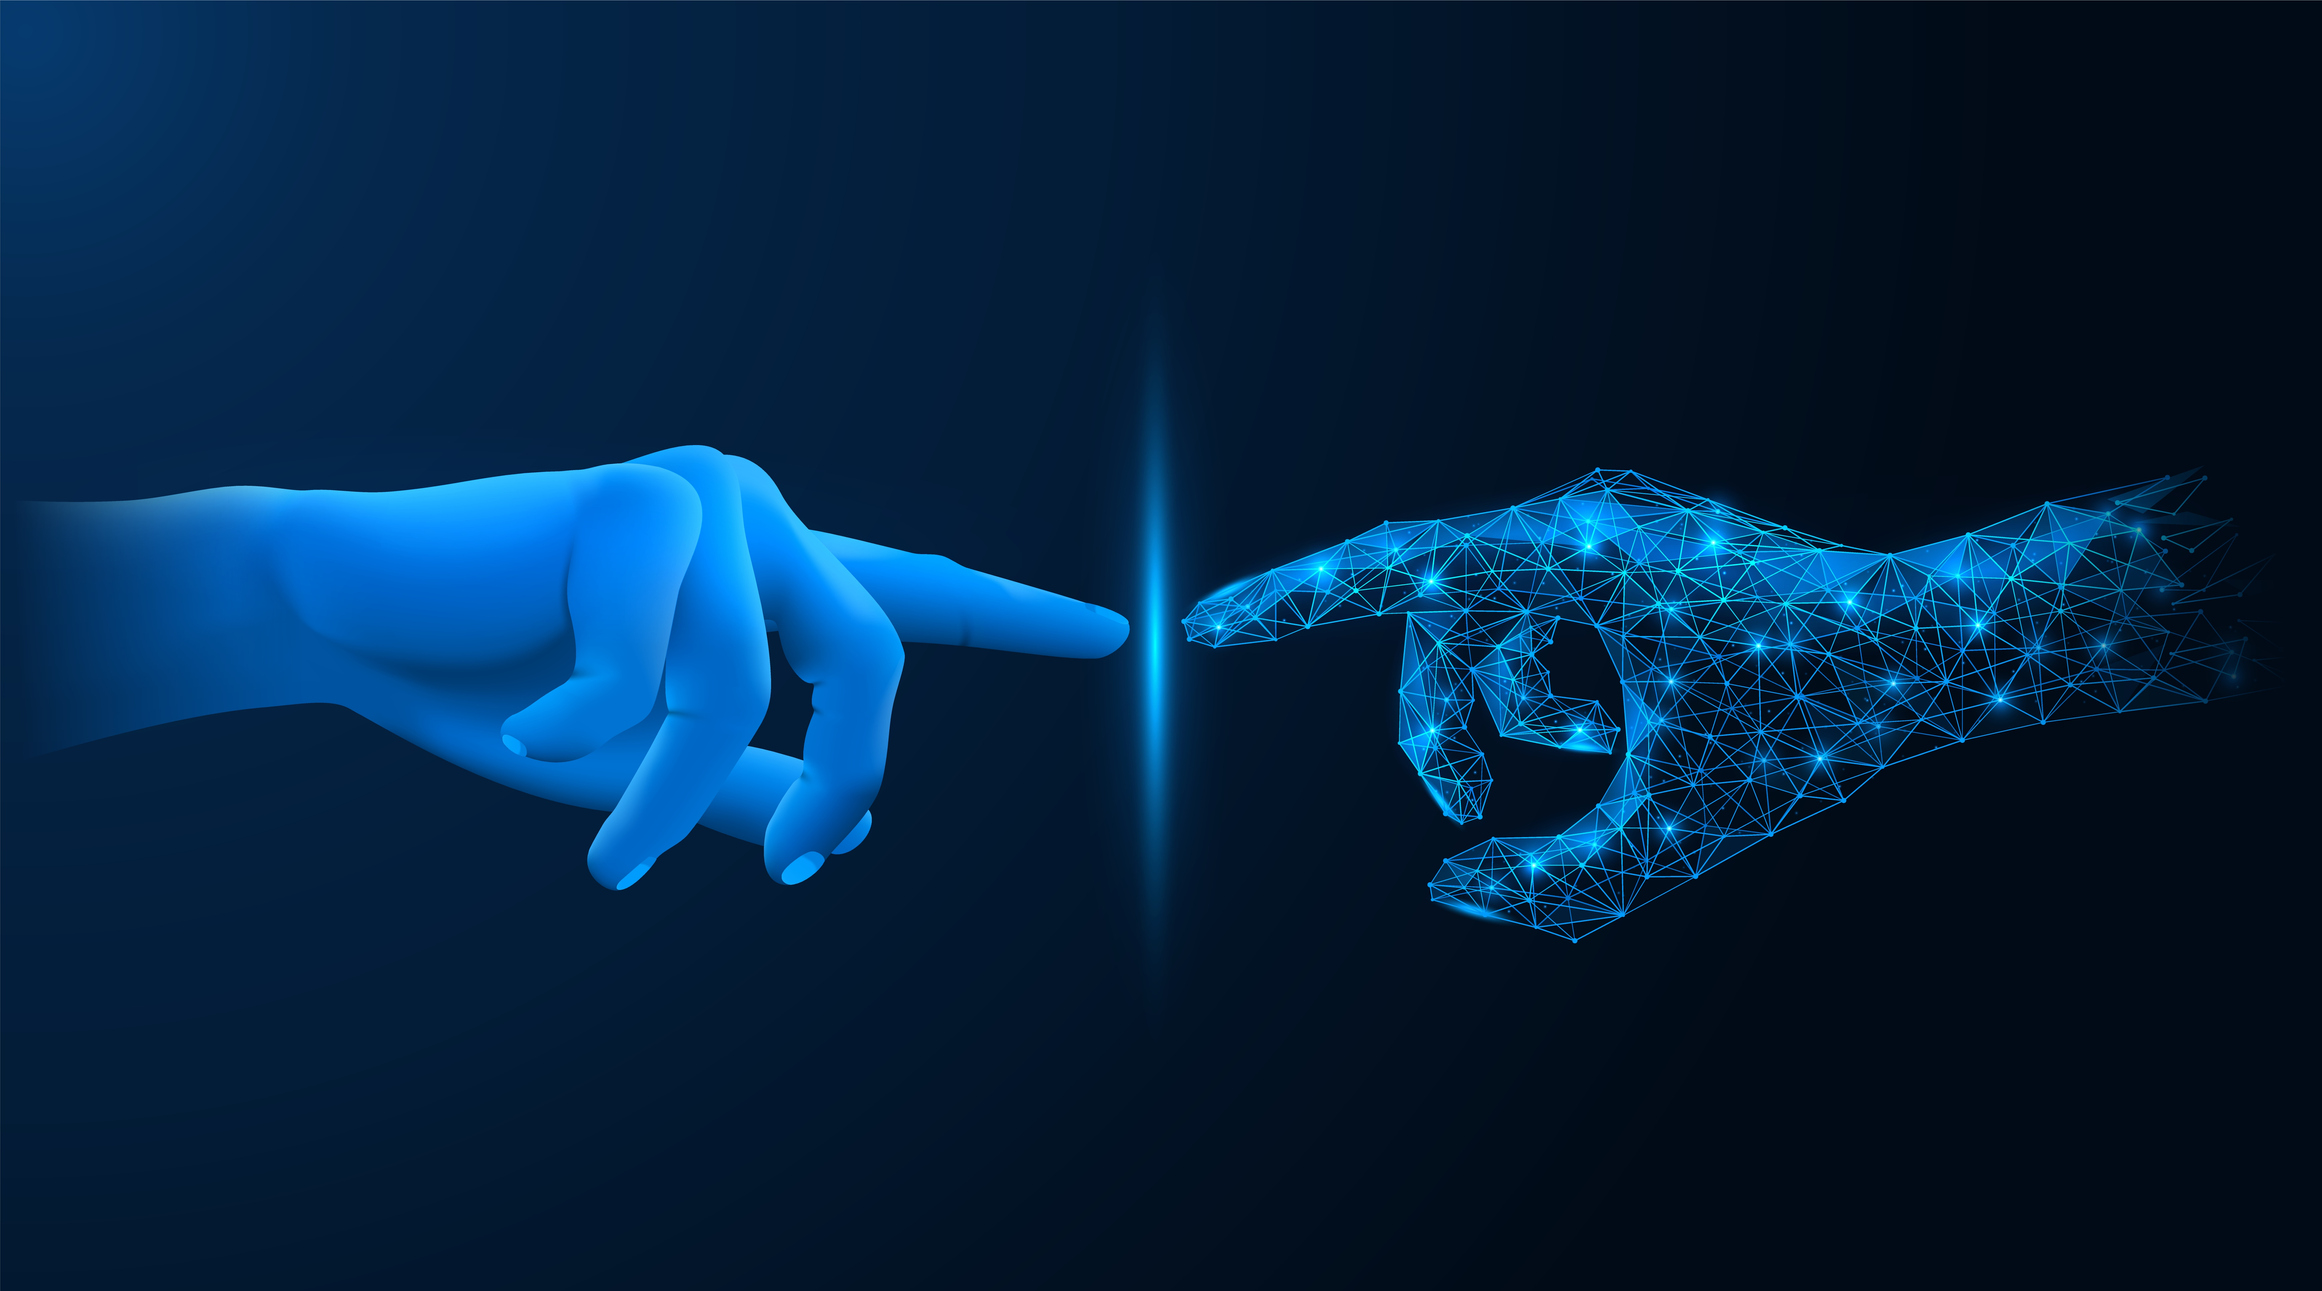 Abstract image of human hand touching an AI "hand"